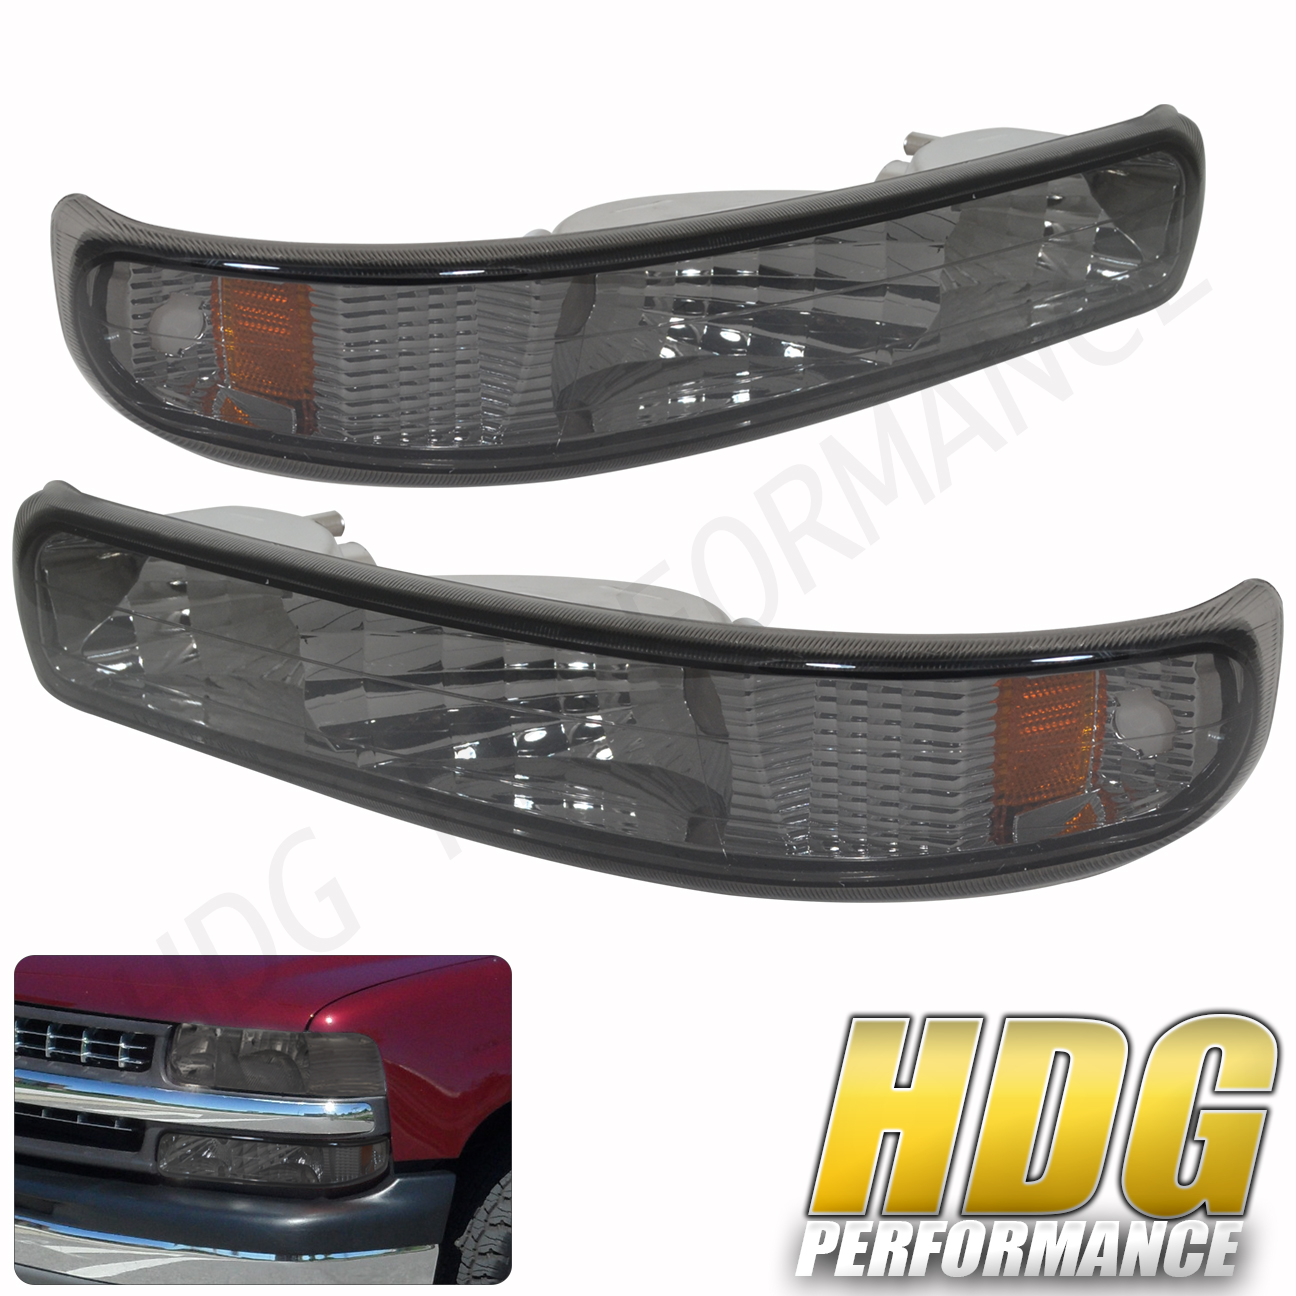 For 1999-2002 Silverado Tahoe Suburban Front Bumper Signal Turn Lamp Light Smoke | eBay 2002 Chevy Tahoe Front Turn Signal Bulb Replacement